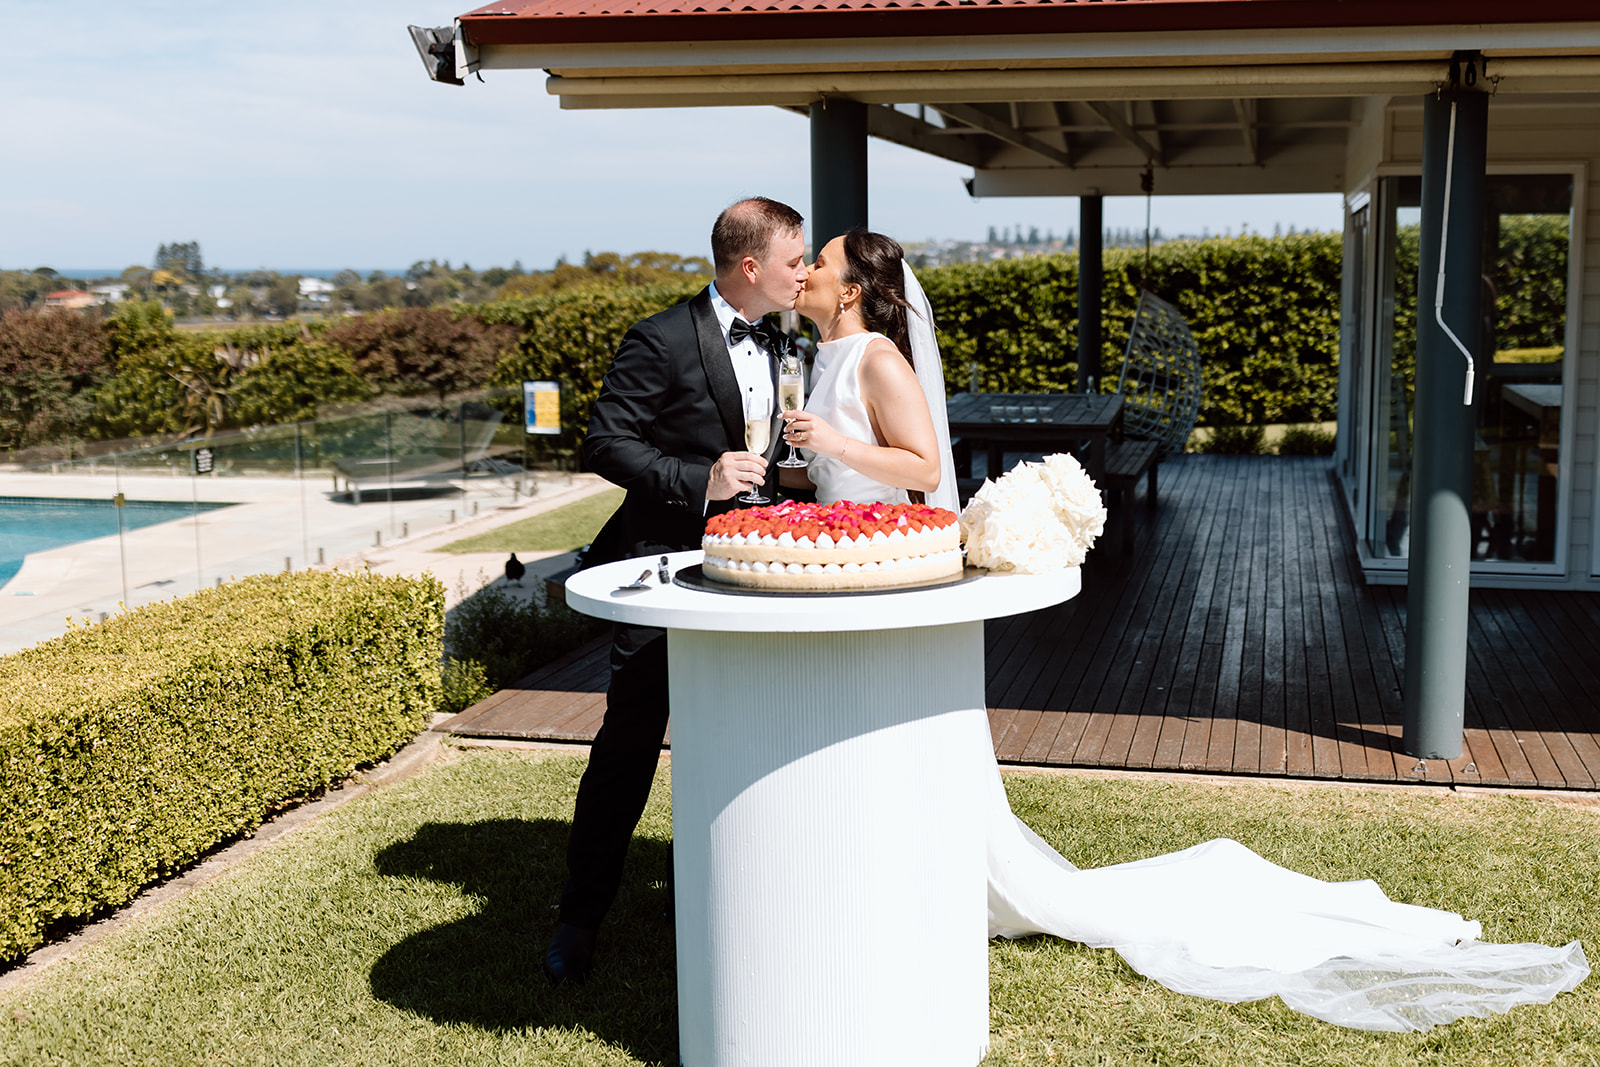 Bride and groom cutting the cake at the wedding in the South Coast Seacliff House